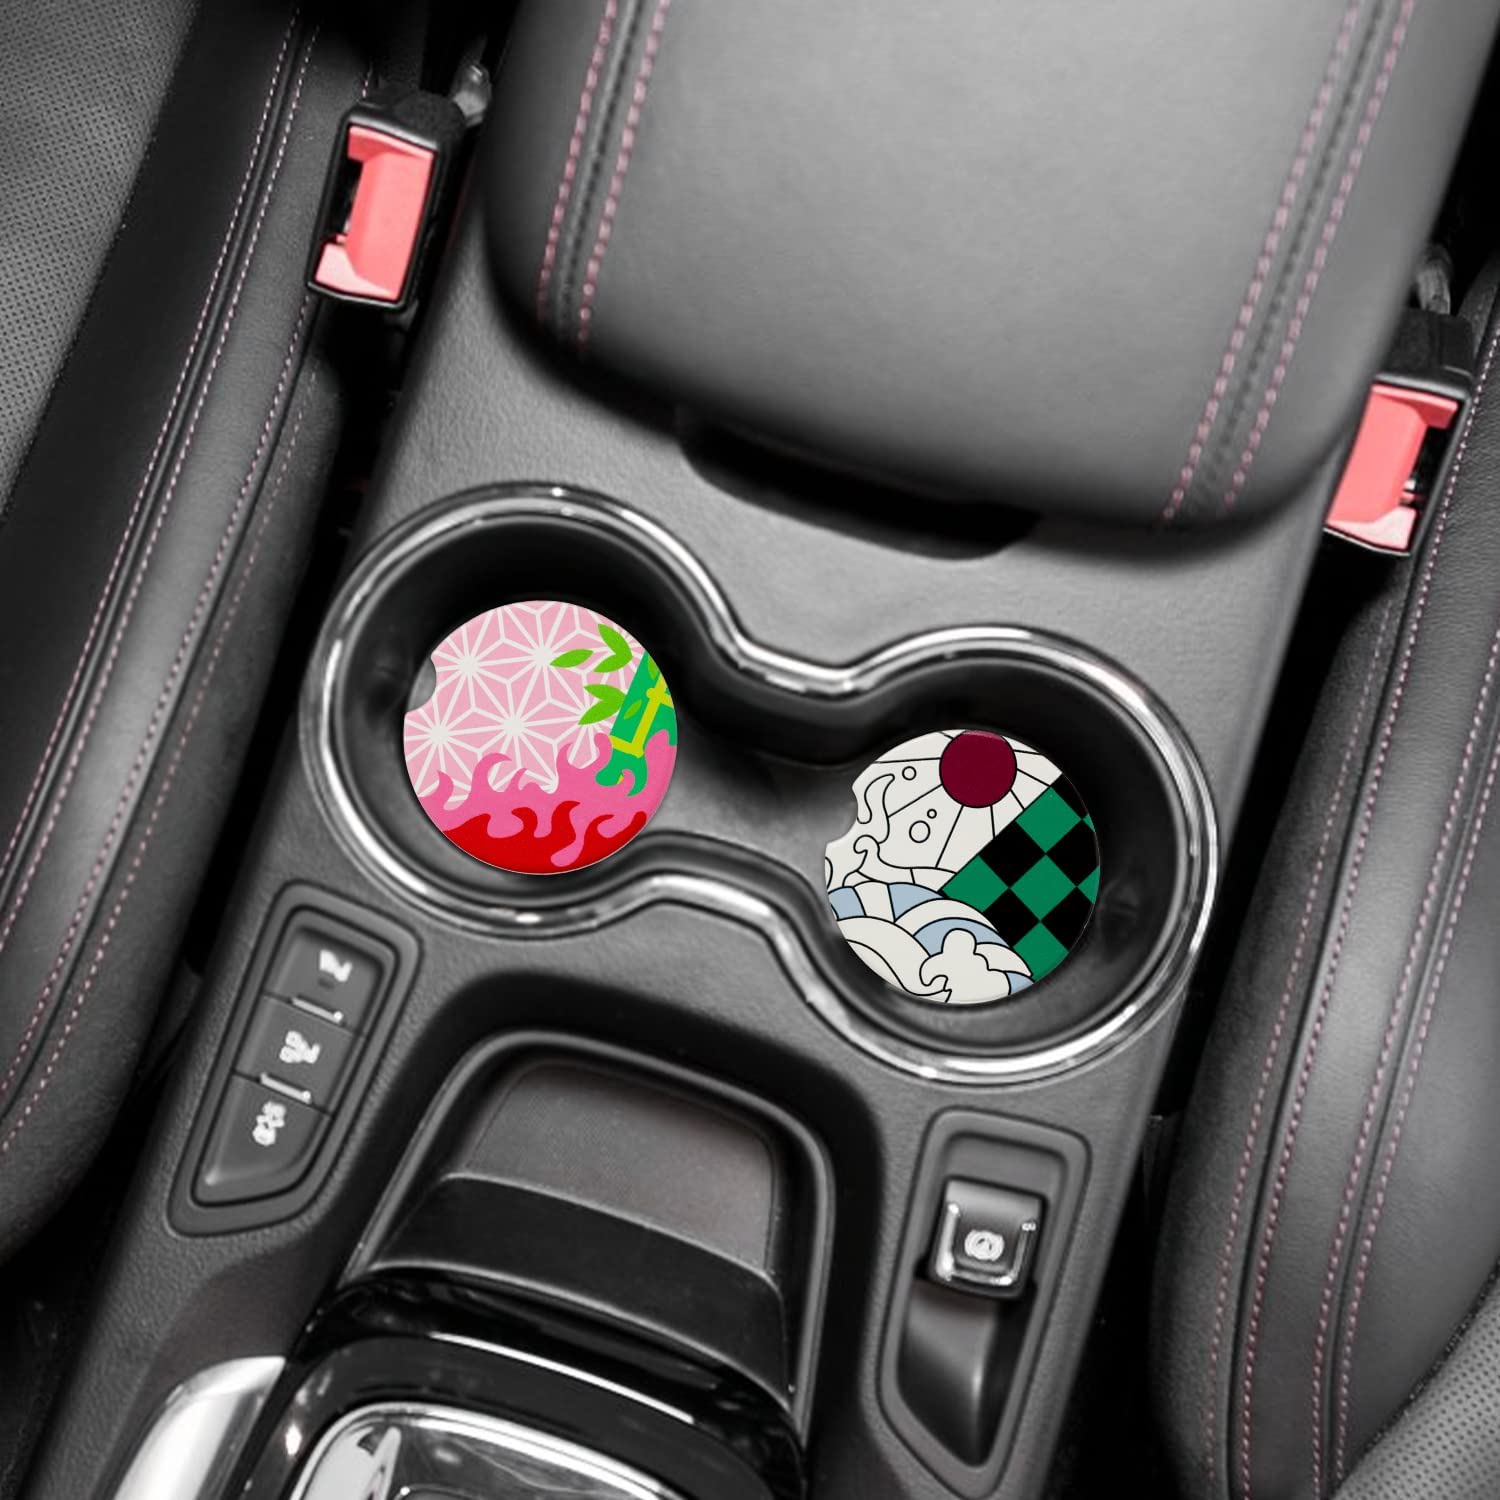  Cute Cup Holder Coasters for Your Car with Fingertip